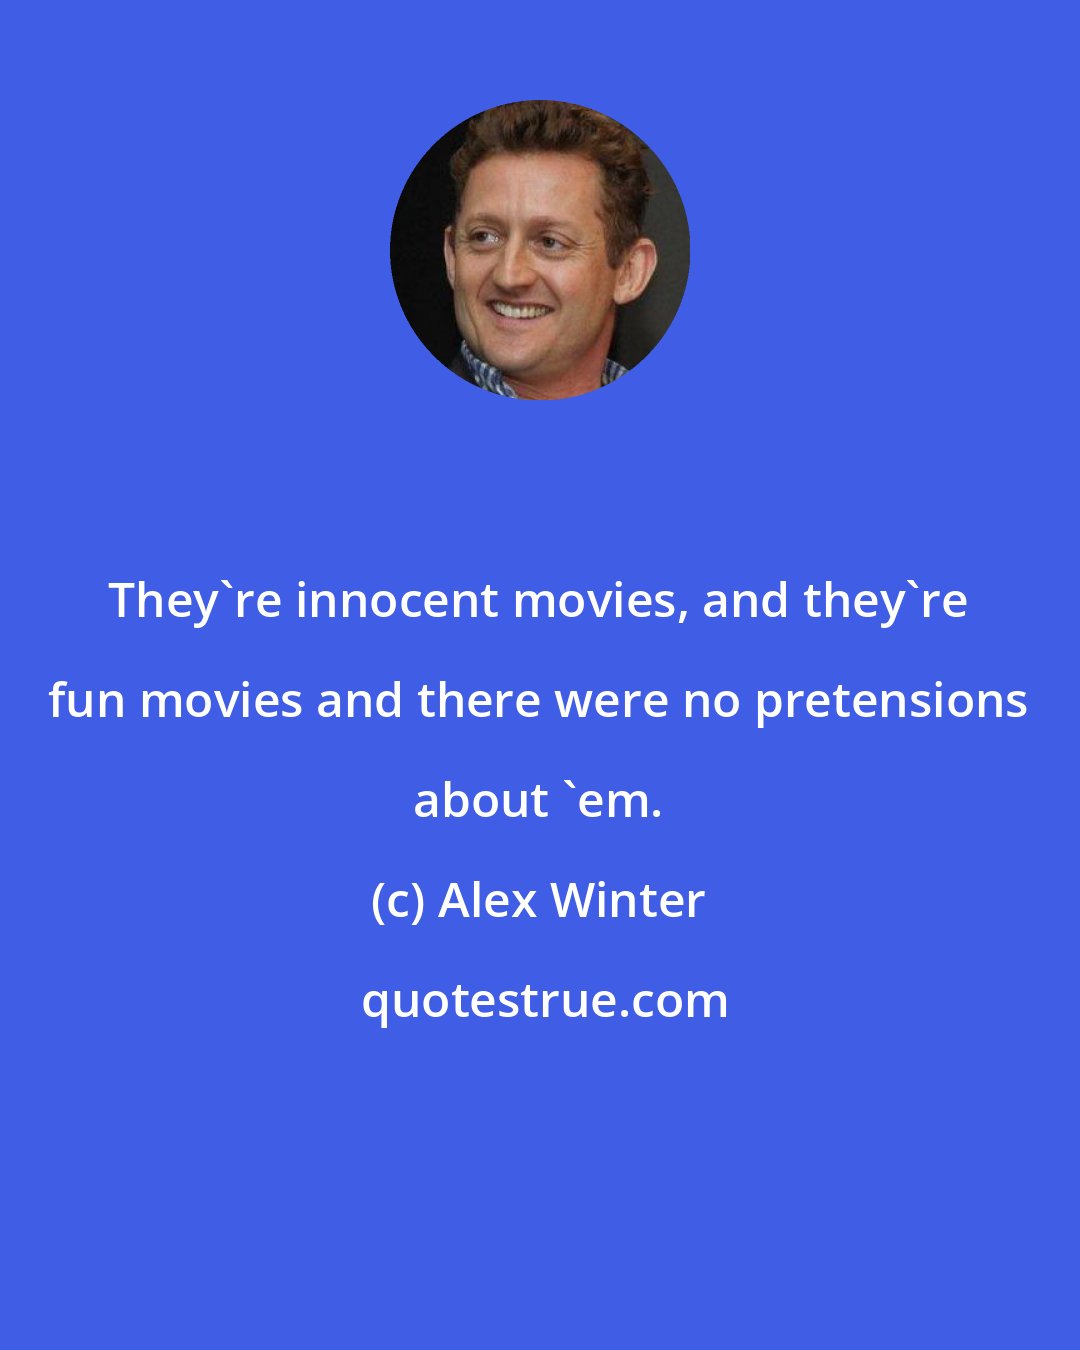 Alex Winter: They're innocent movies, and they're fun movies and there were no pretensions about 'em.